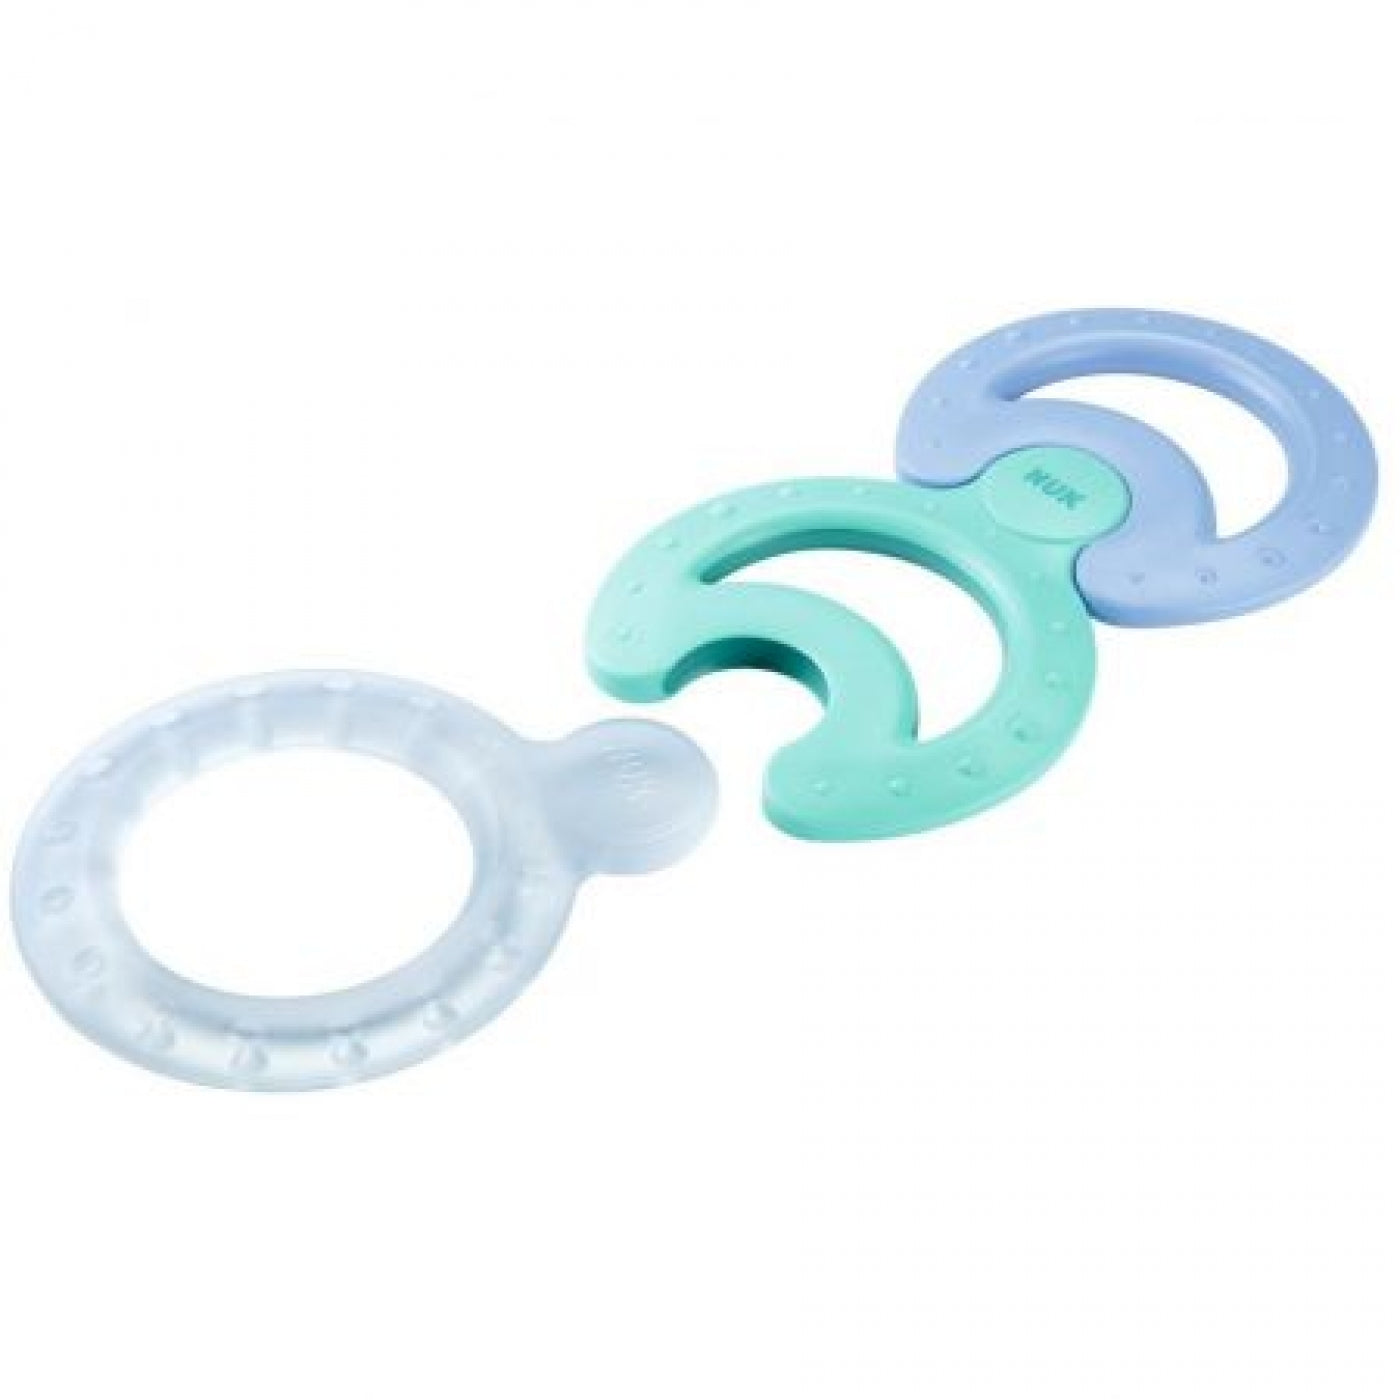 NUK CONNECT-AND-PLAY TEETHER SET